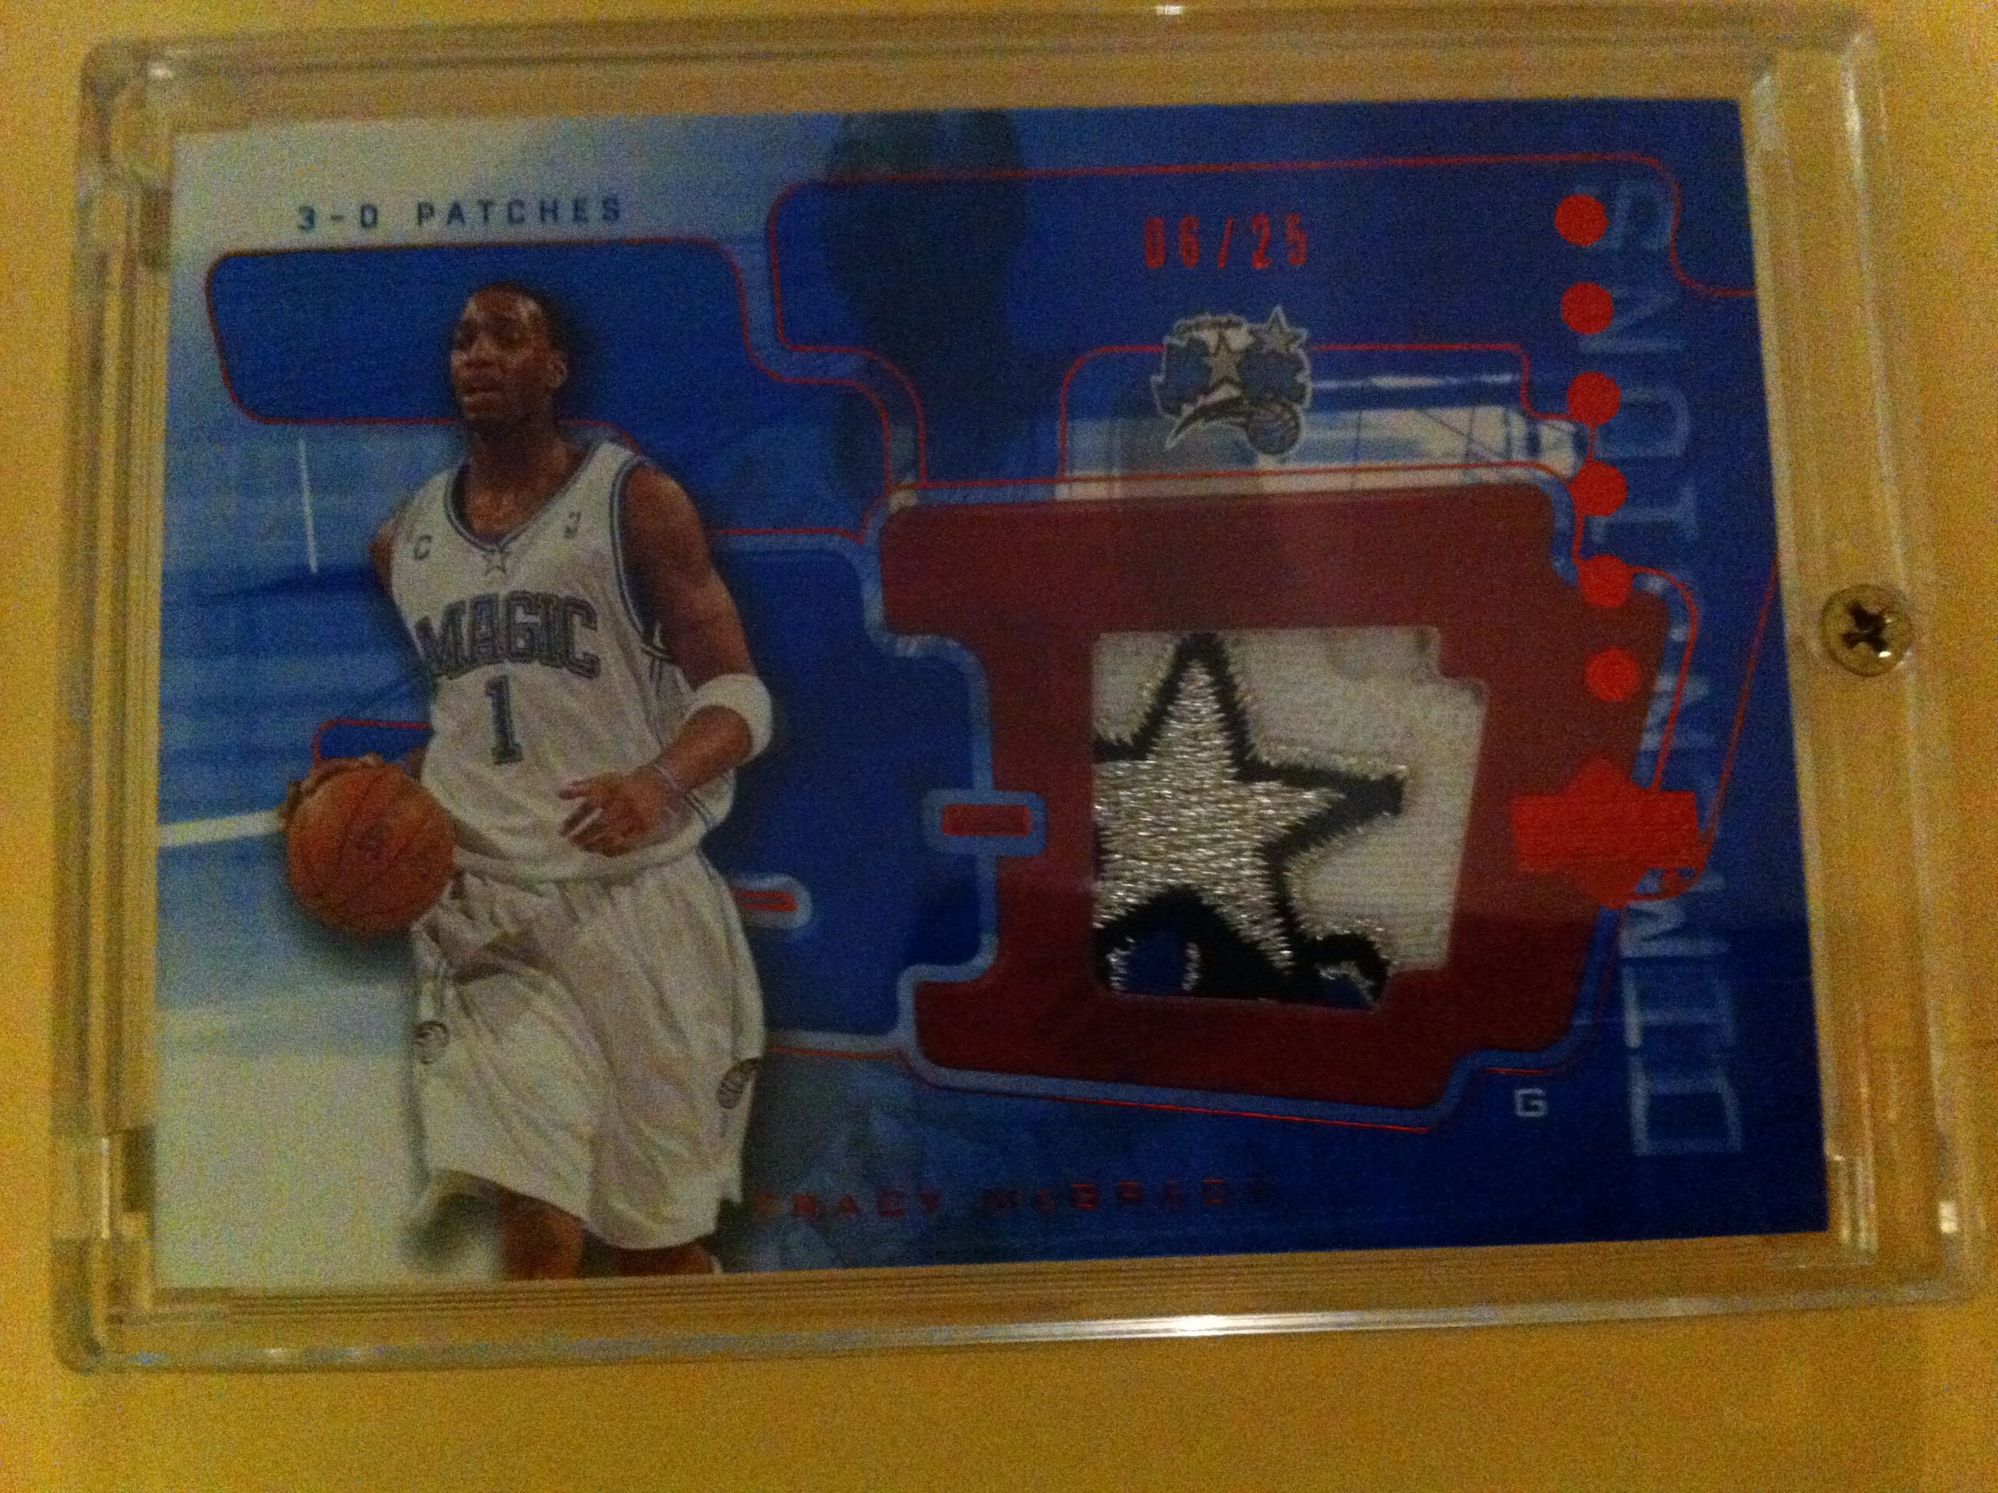 Tmac 3D Patches.jpg